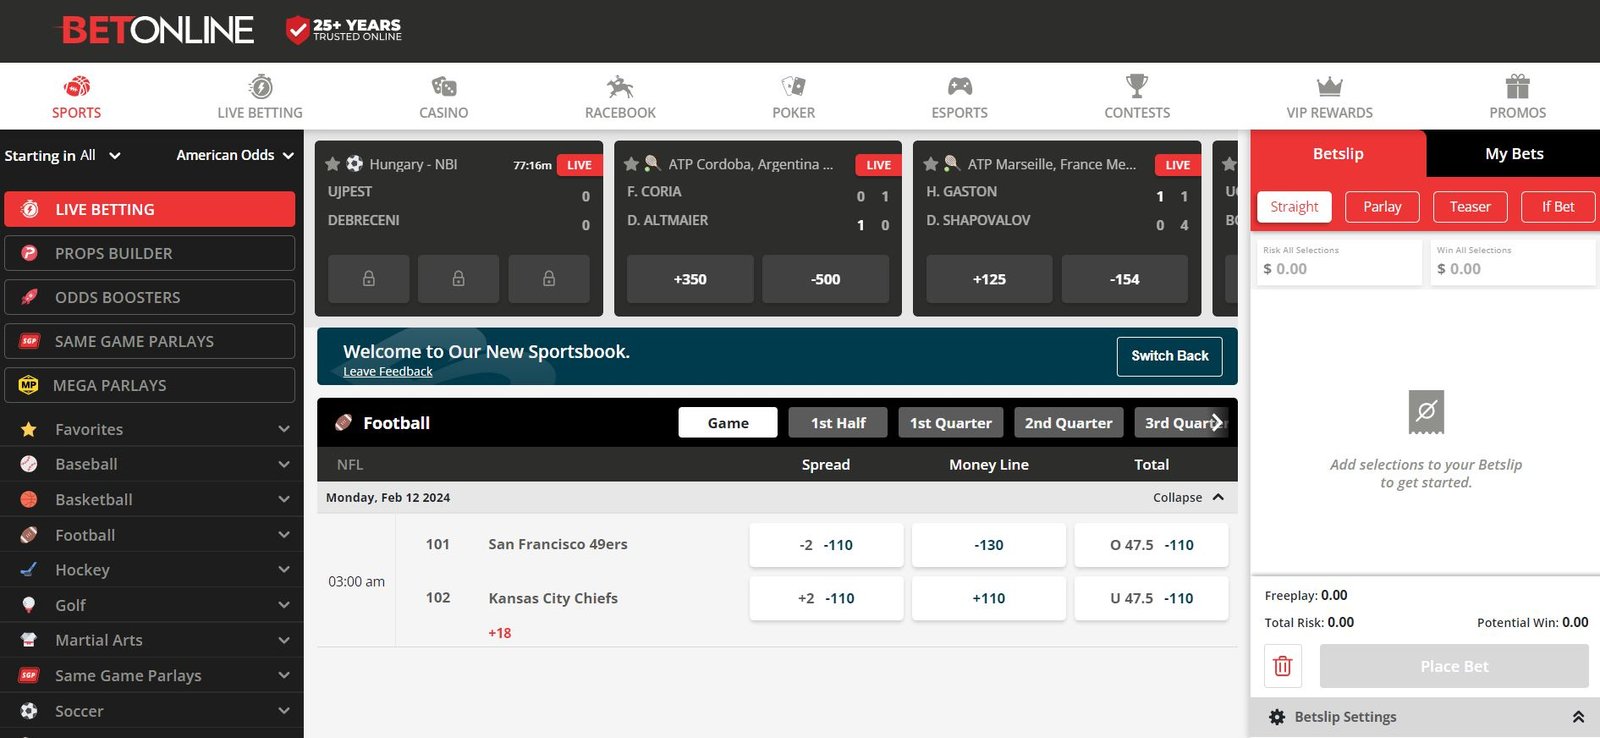 Live Betting, Parlays & More at BetOnline Sportsbook 